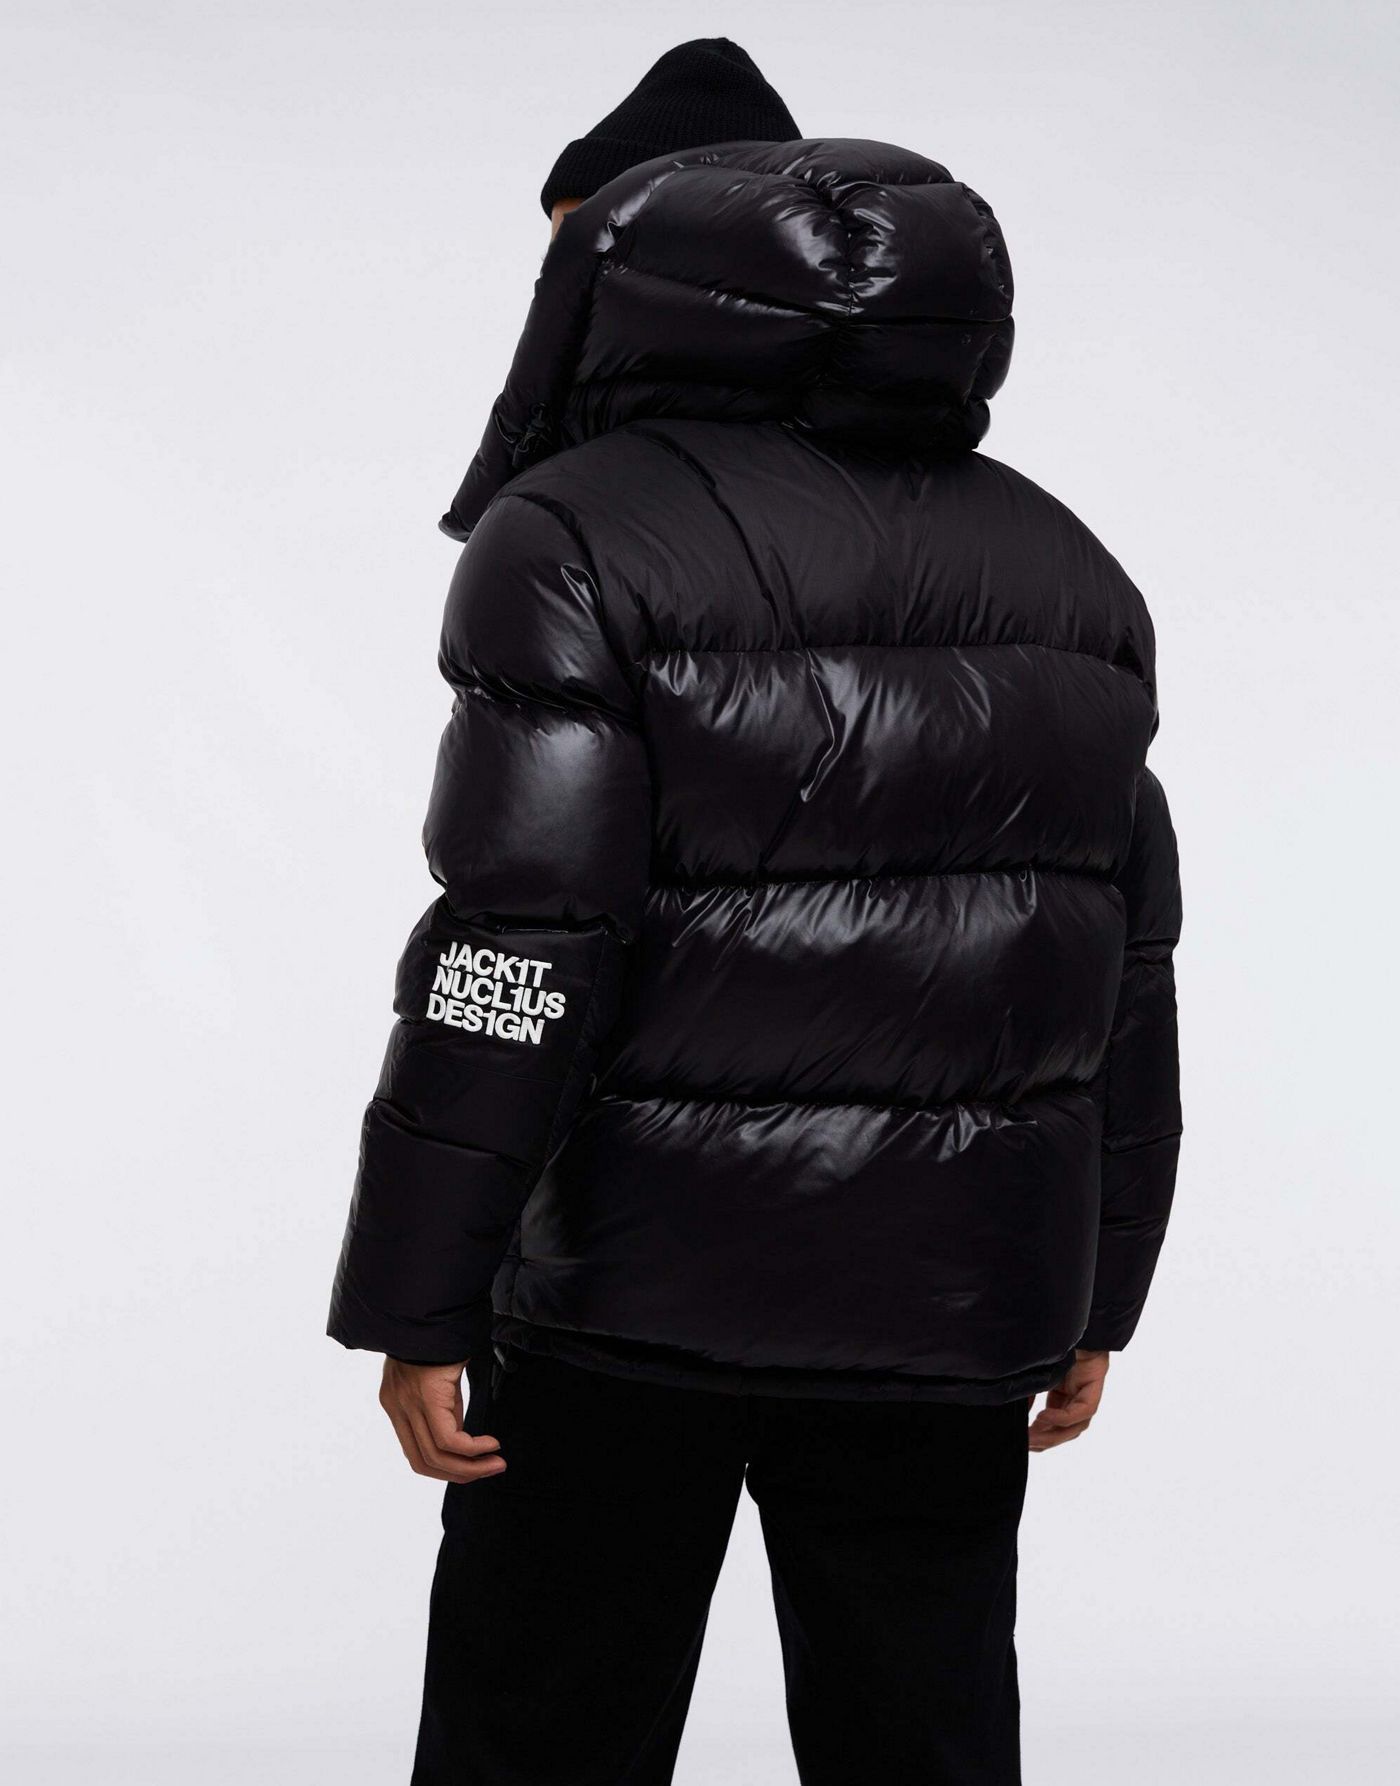 JACK1T expedition parka down coat in black and black